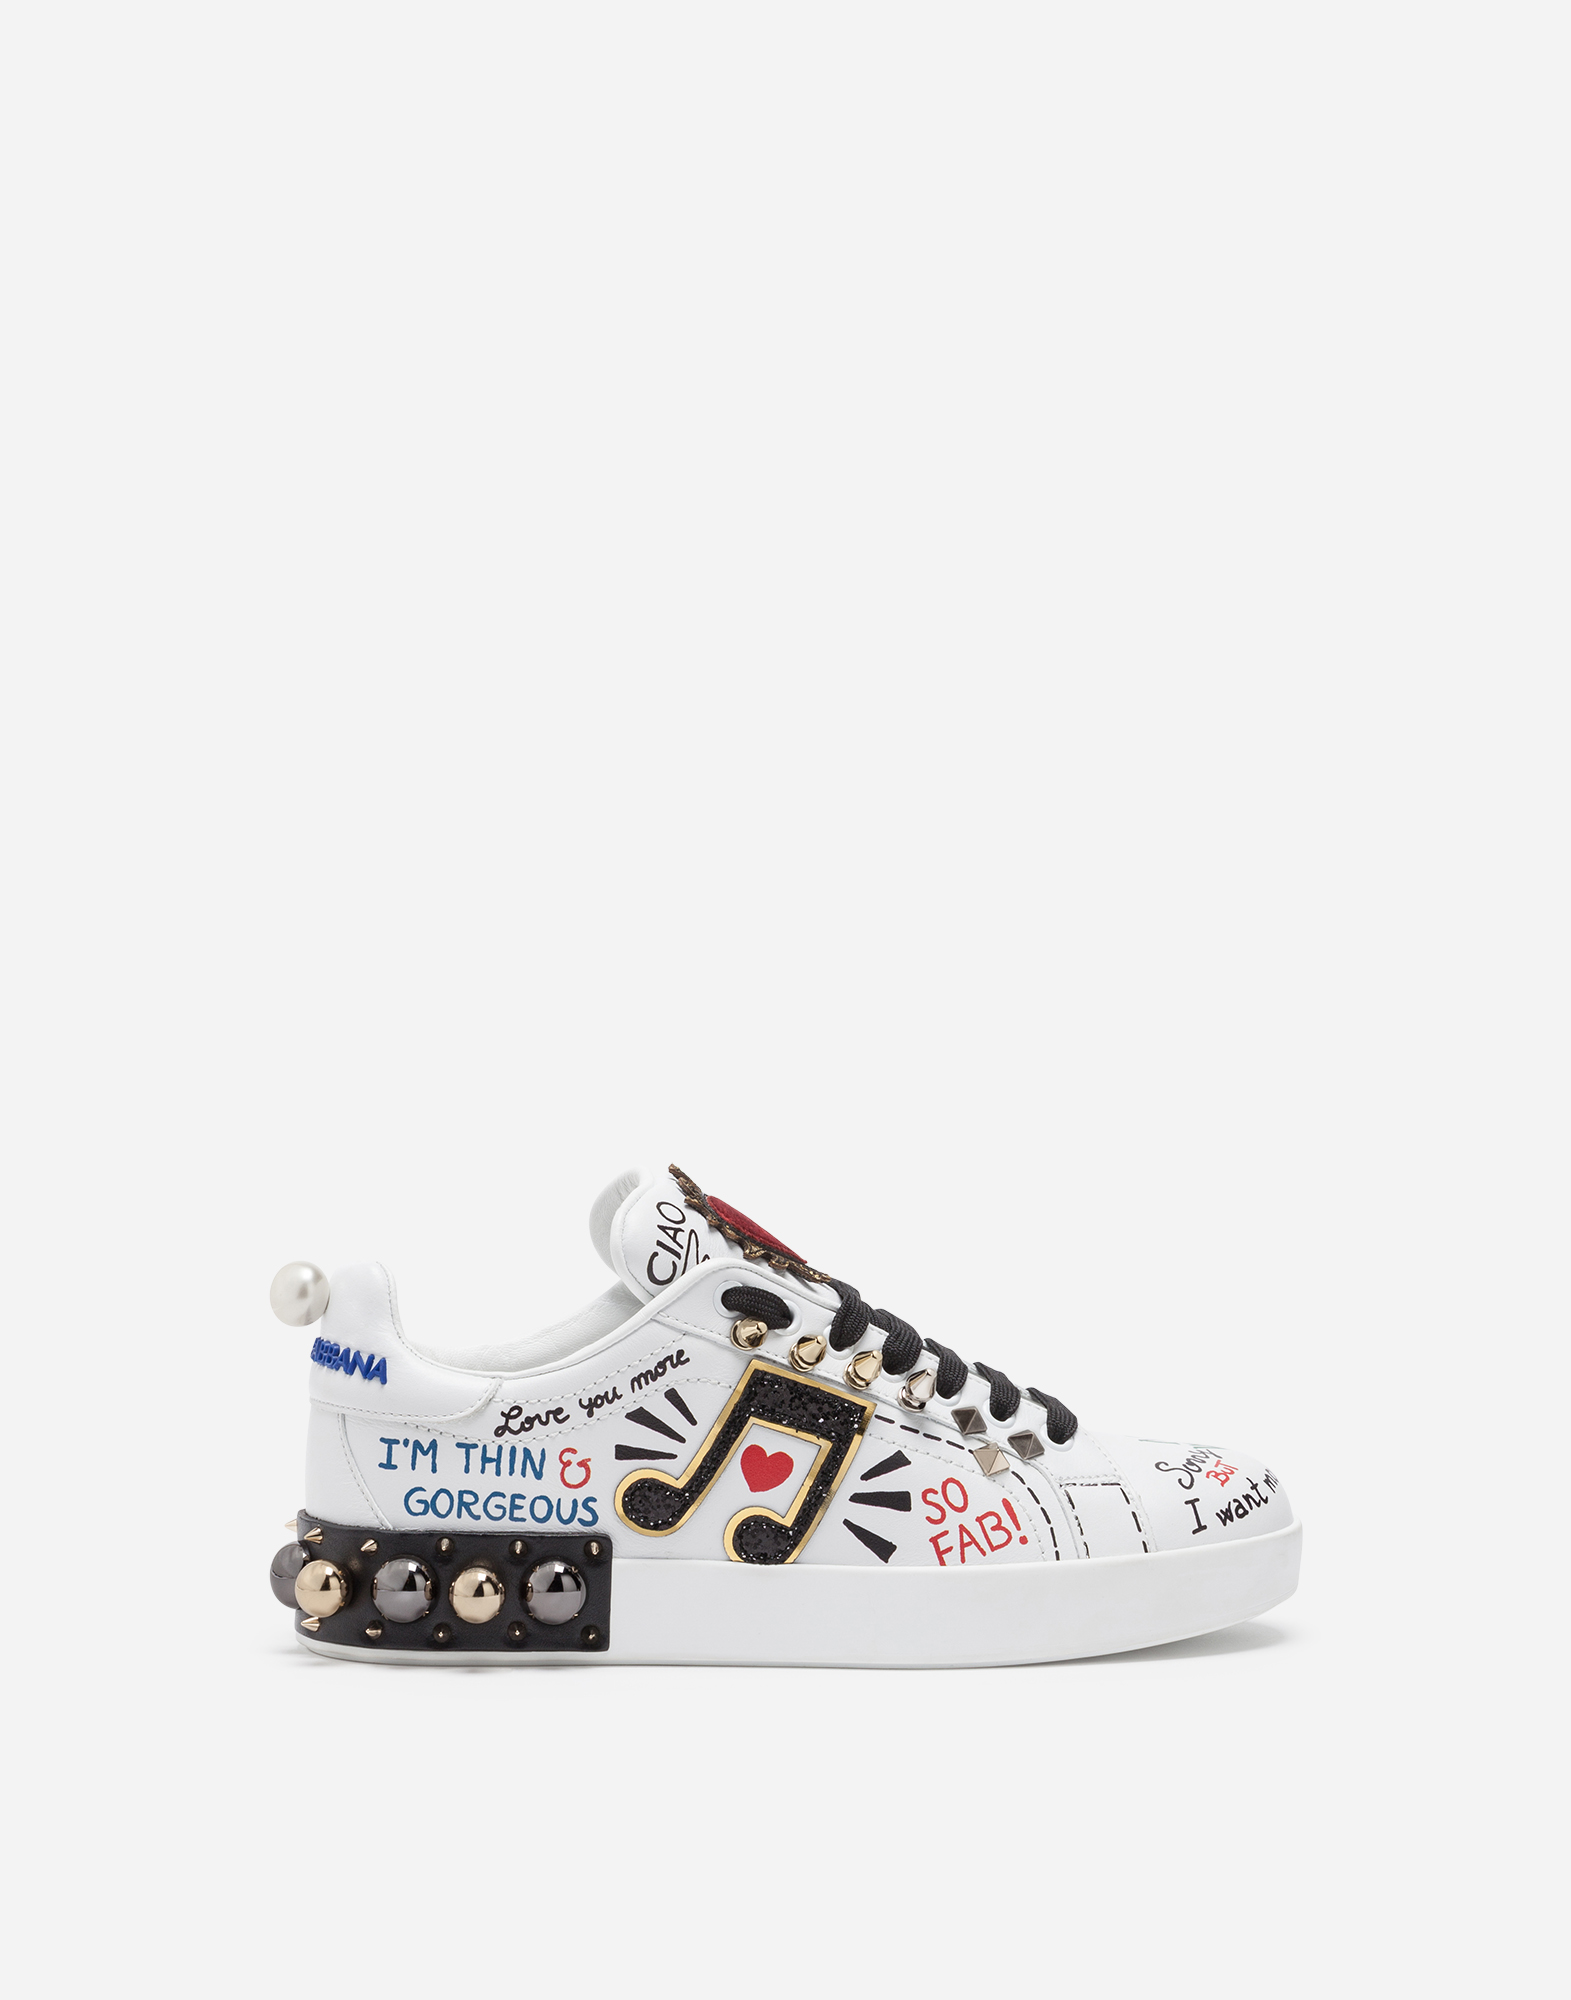 dolce and gabbana personalized sneakers